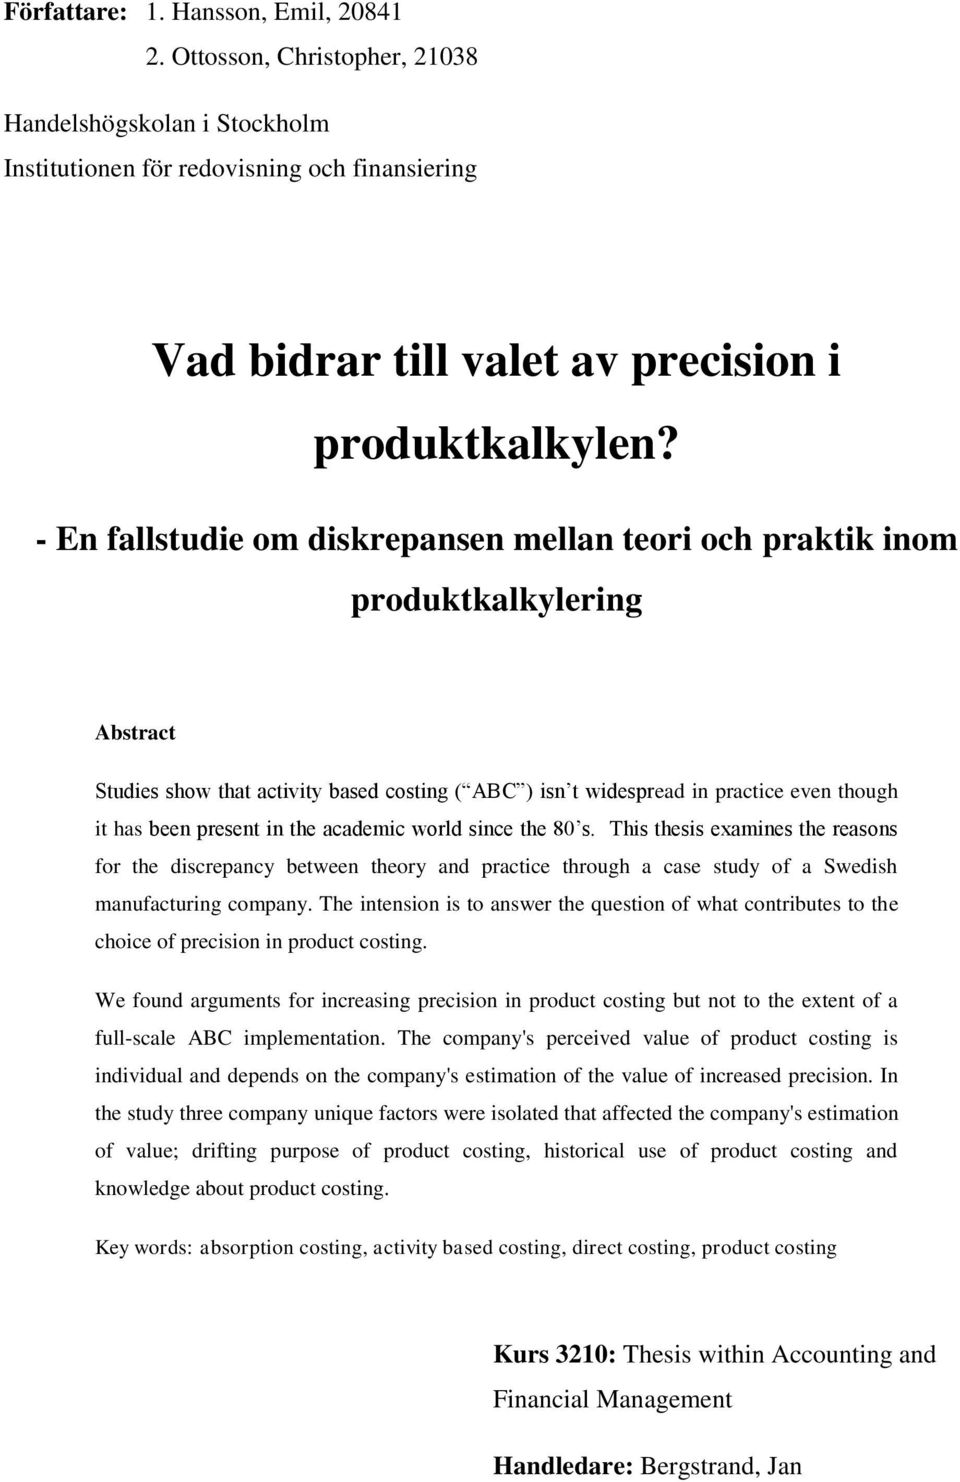 in the academic world since the 80 s. This thesis examines the reasons for the discrepancy between theory and practice through a case study of a Swedish manufacturing company.